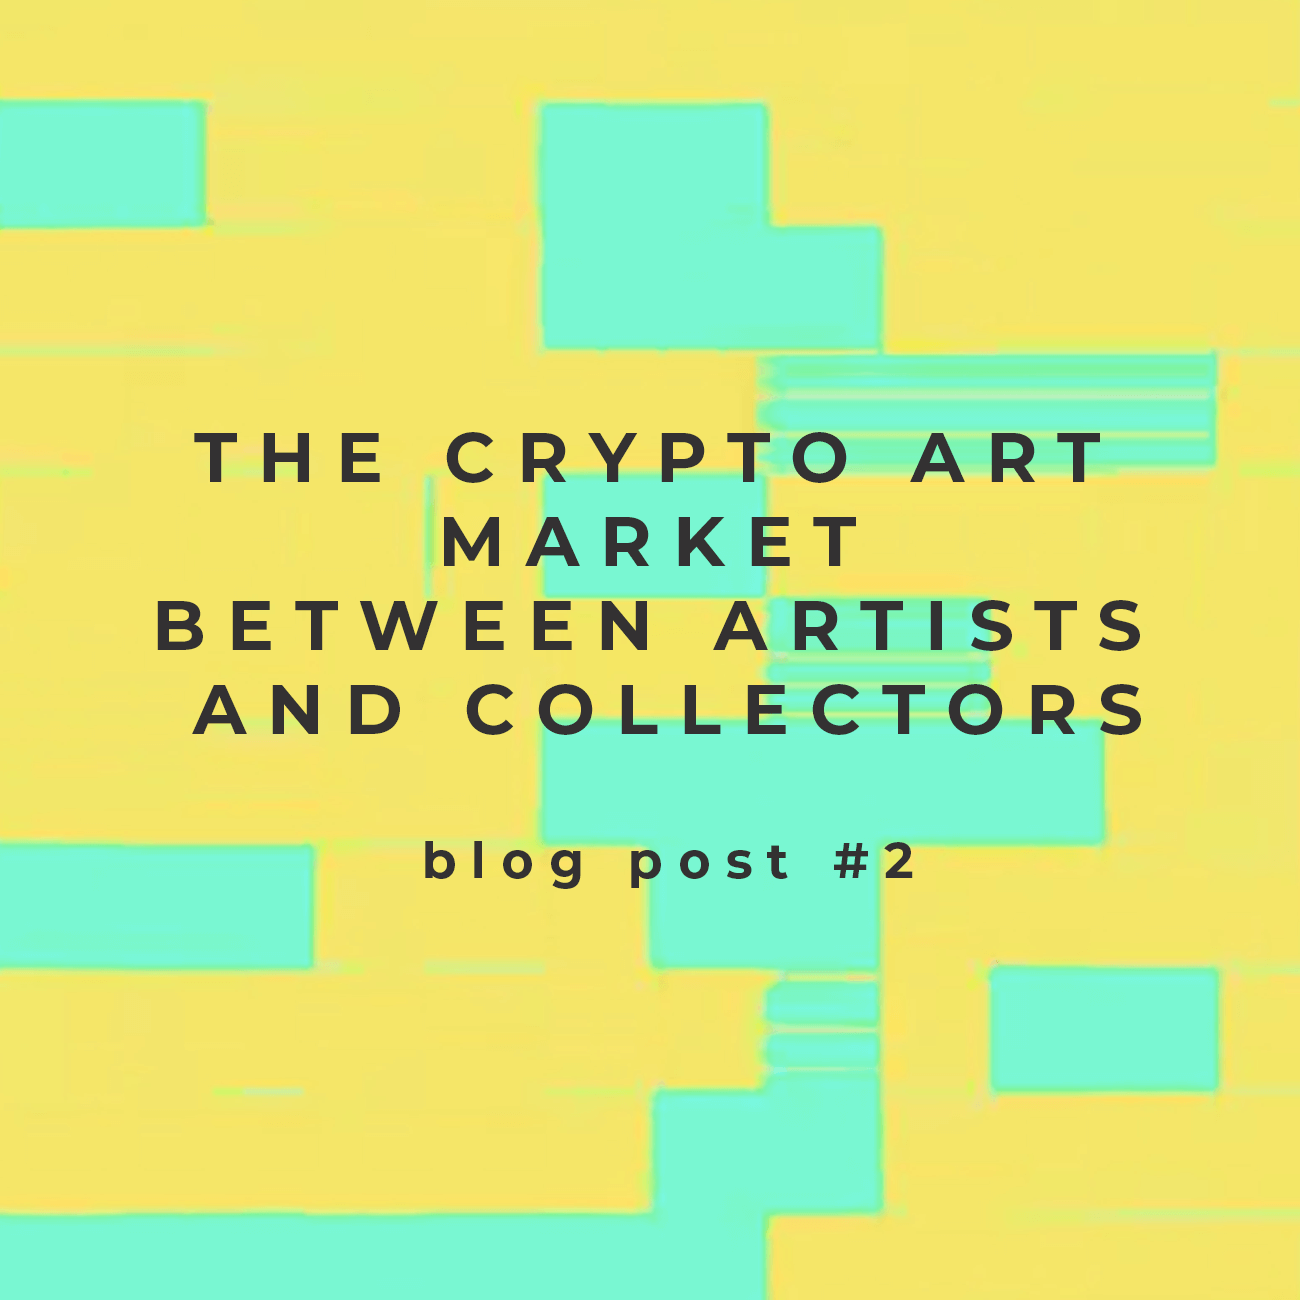 The Crypto Art Market between Artists and Collectors